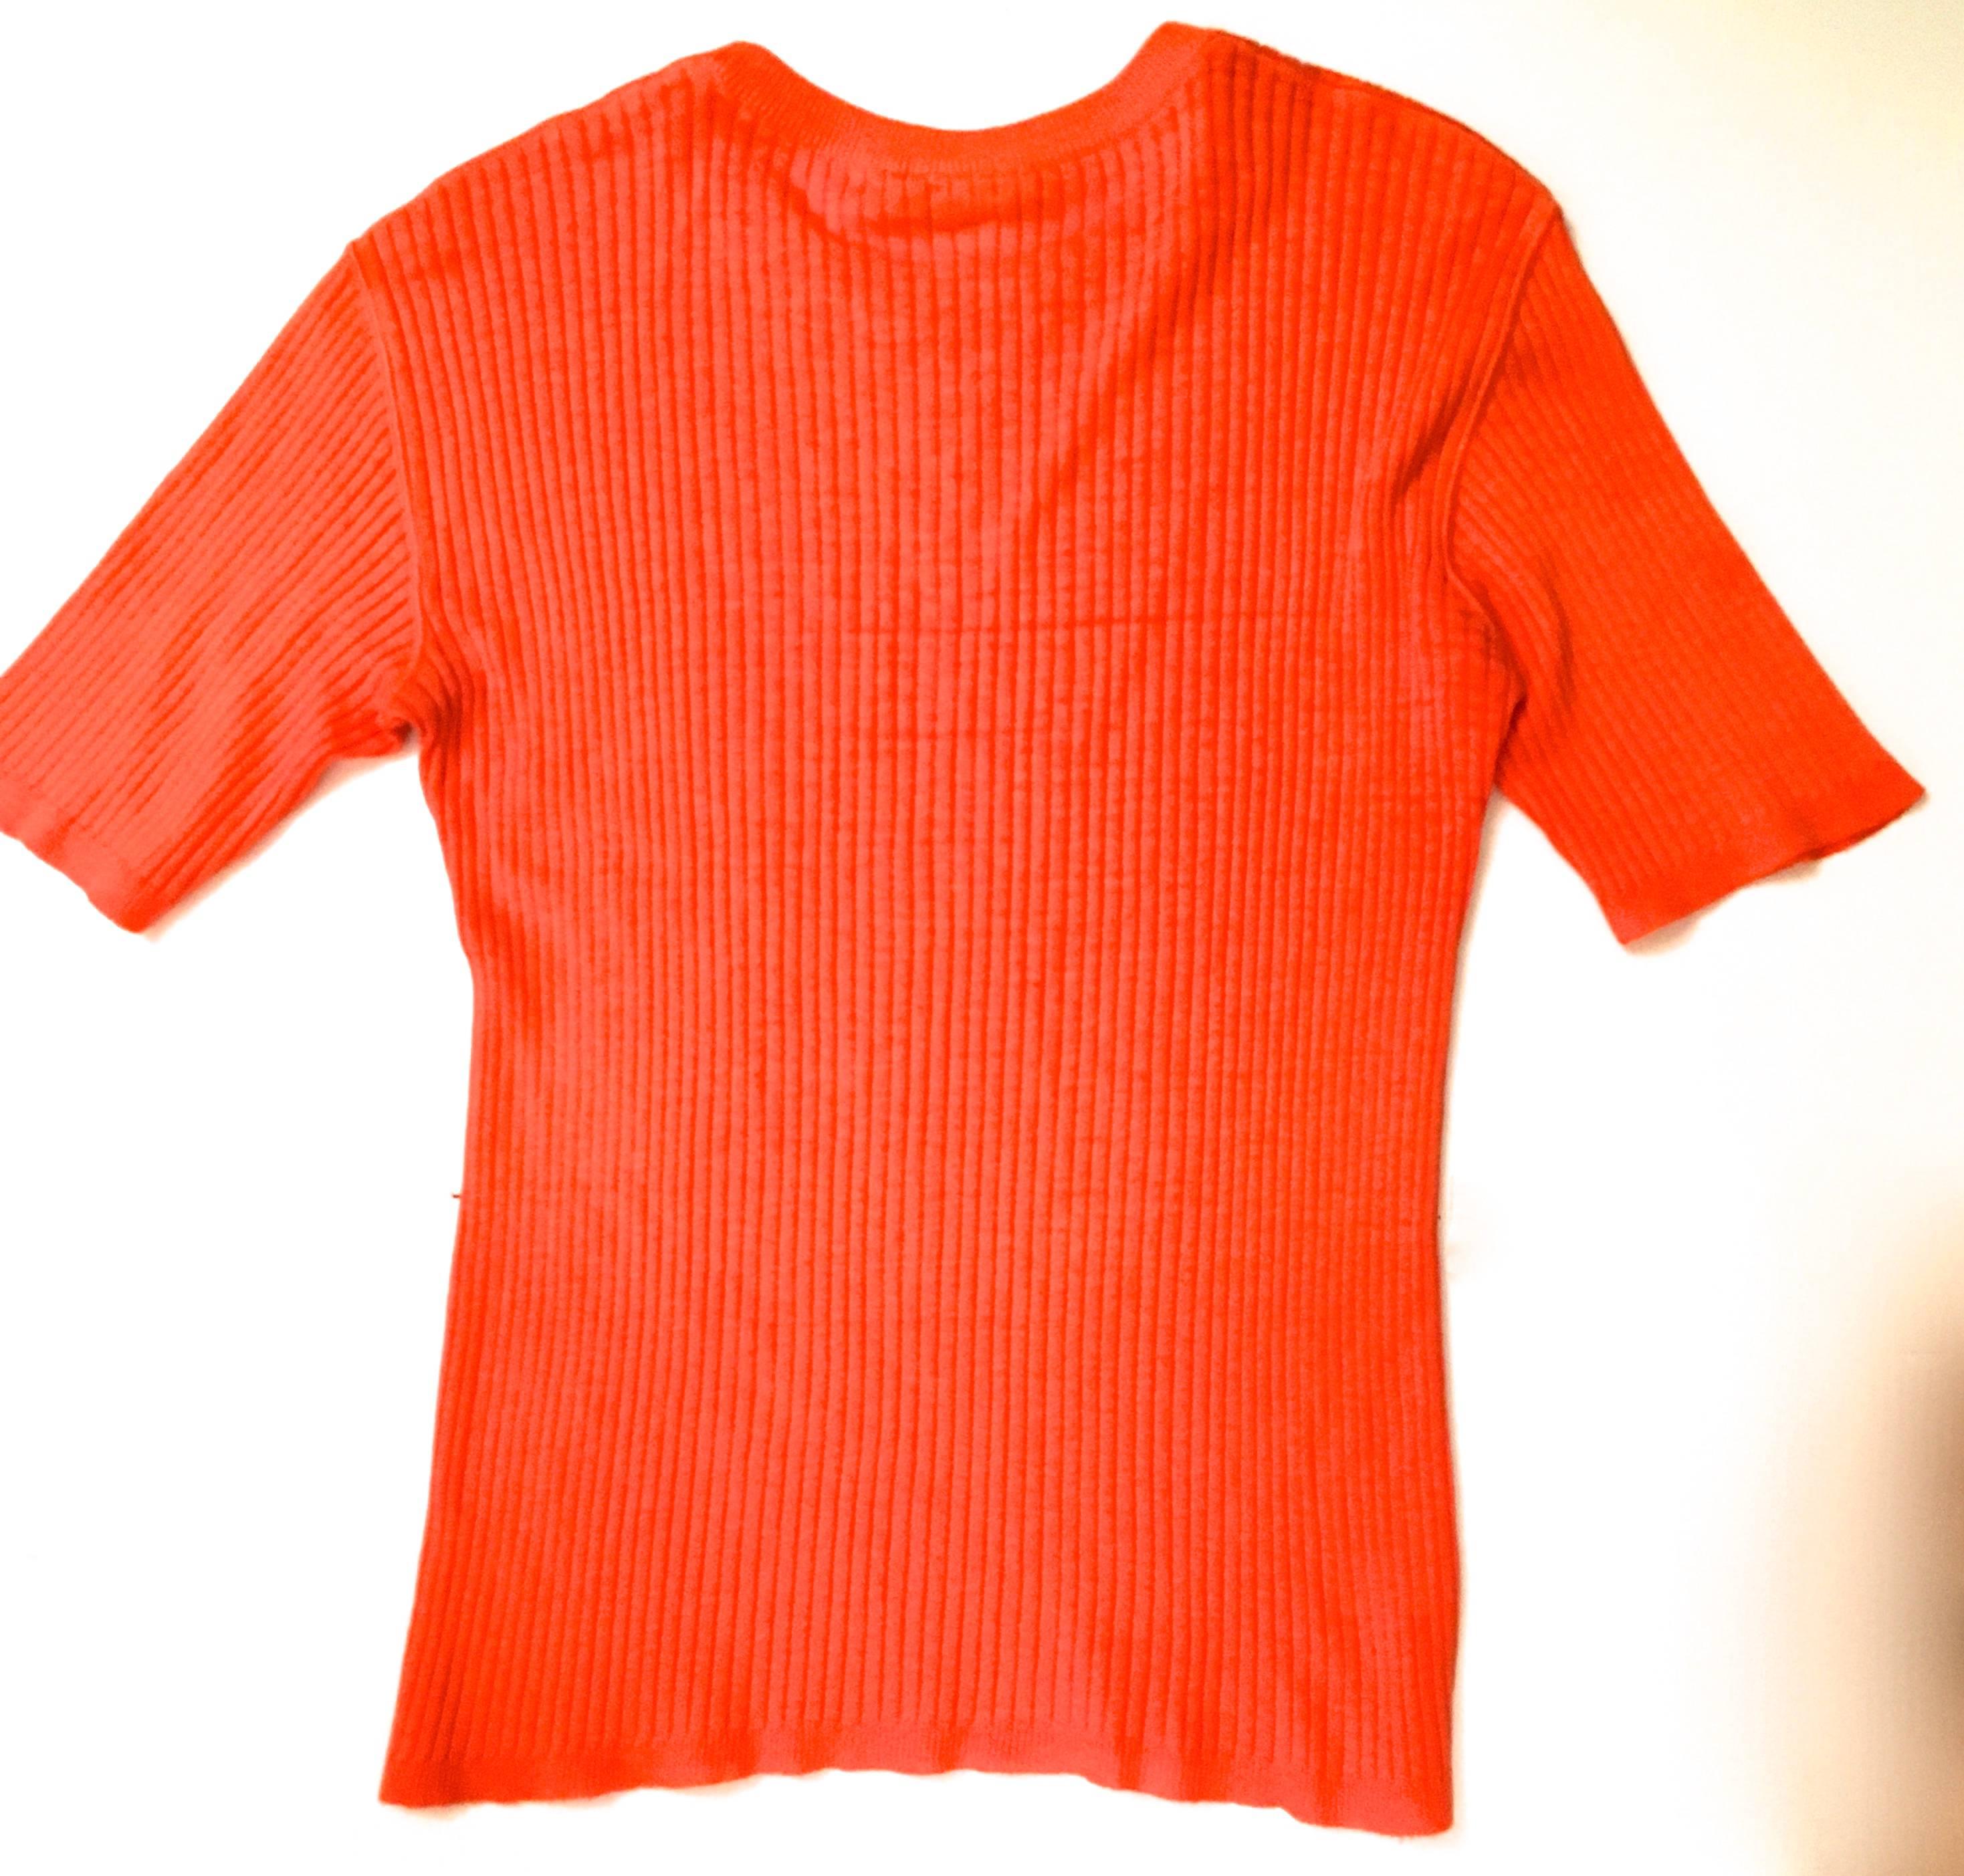 Presented here is an vintage men's sweater from Courreges. This extremely rare vintage sweater is from the 1960's and is in excellent condition. The sweater is orange and has the Courreges insignia embroidered on the chest of the sweater. The